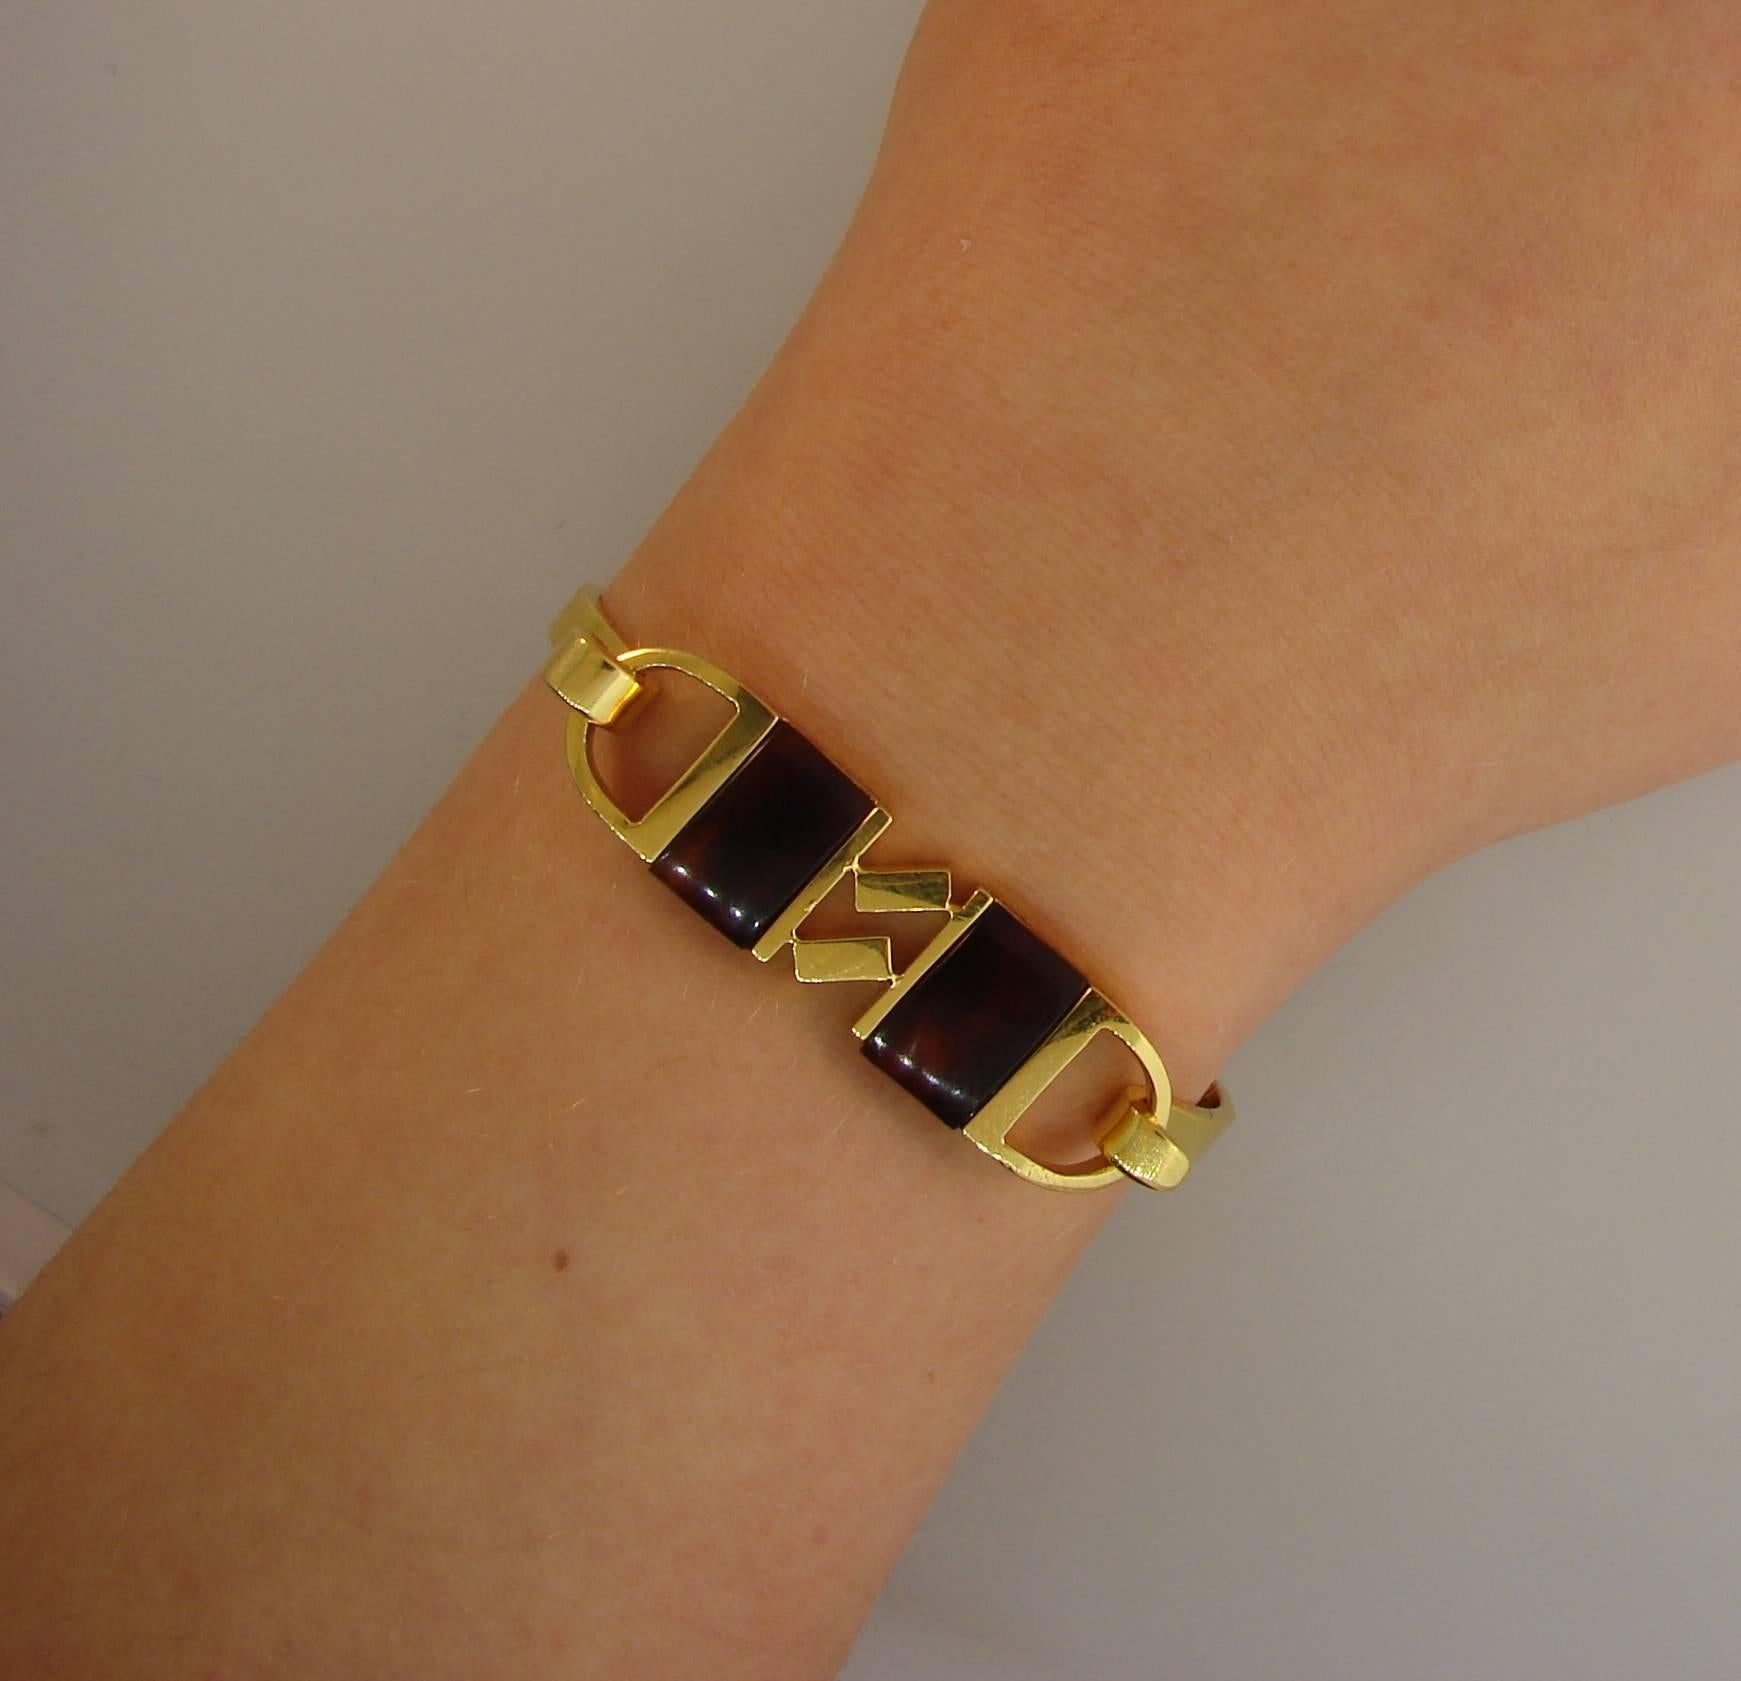 Colorful geometrical bracelet created by Cartier in 1970s. Funky and wearable, the bangle is a great addition to your jewelry collection. 
Made of 18 karat yellow gold and tortoise shell. 
Top center measures 1-3/4 x 1/2 inch (4.5 x 1.2 cm). Back is